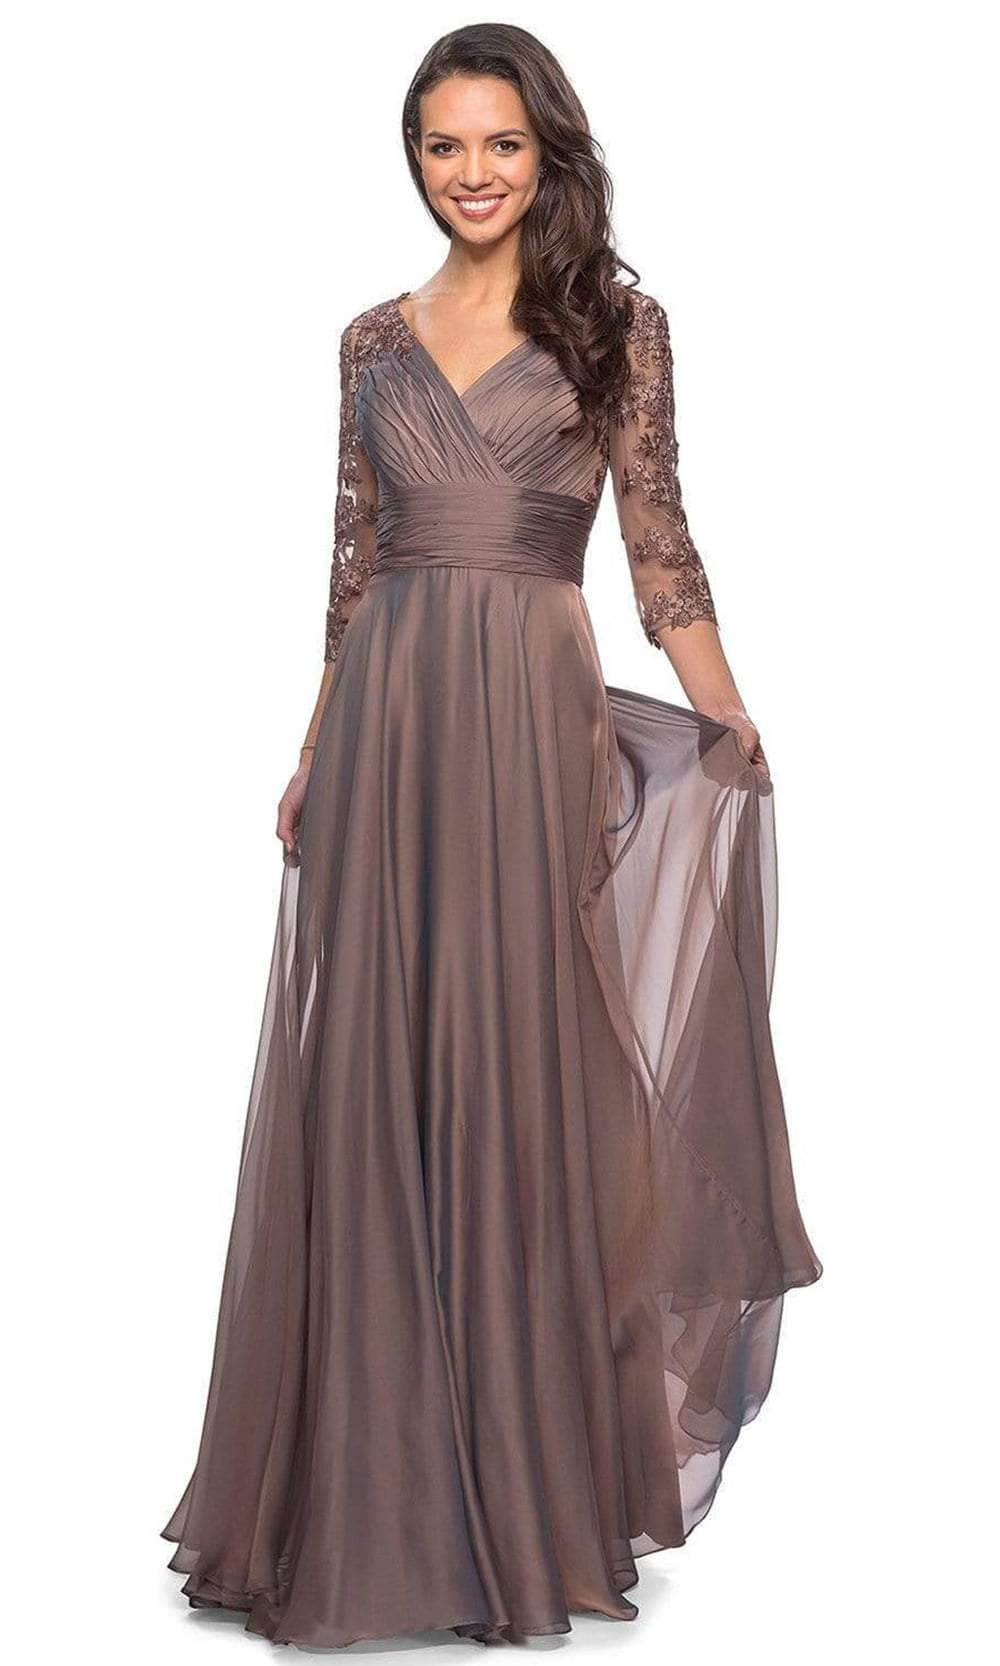 Image of La Femme - 27153 Sheer Lace Quarter Sleeves Empire Waist Chiffon Gown